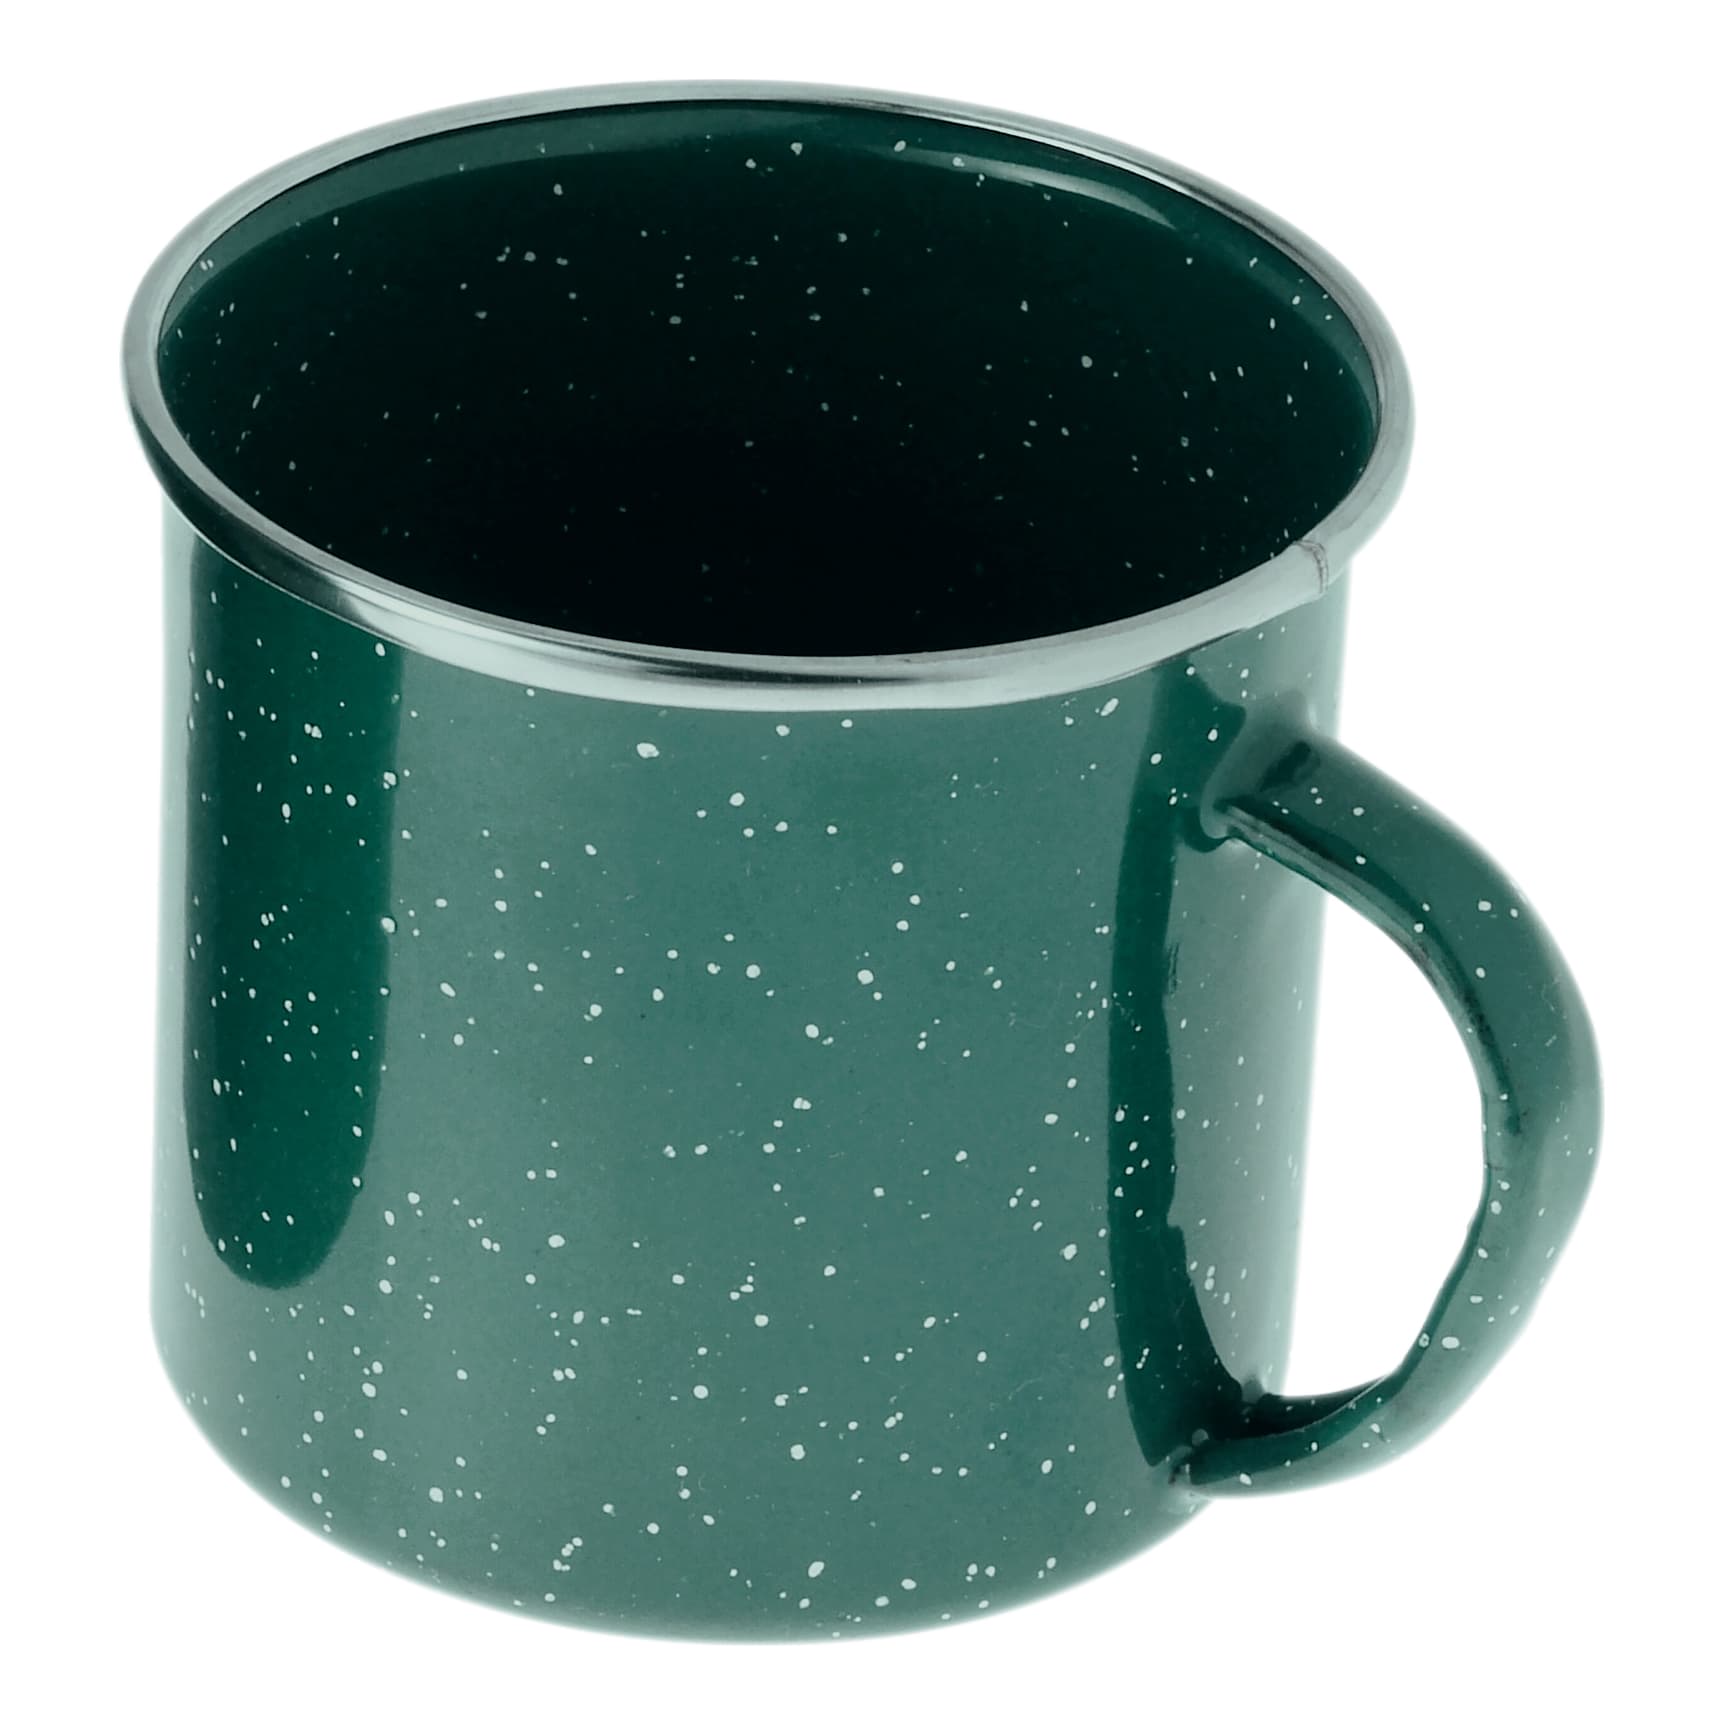 GSI Outdoors Stainless Green Pioneer Enamel Cup -  - 12 oz.